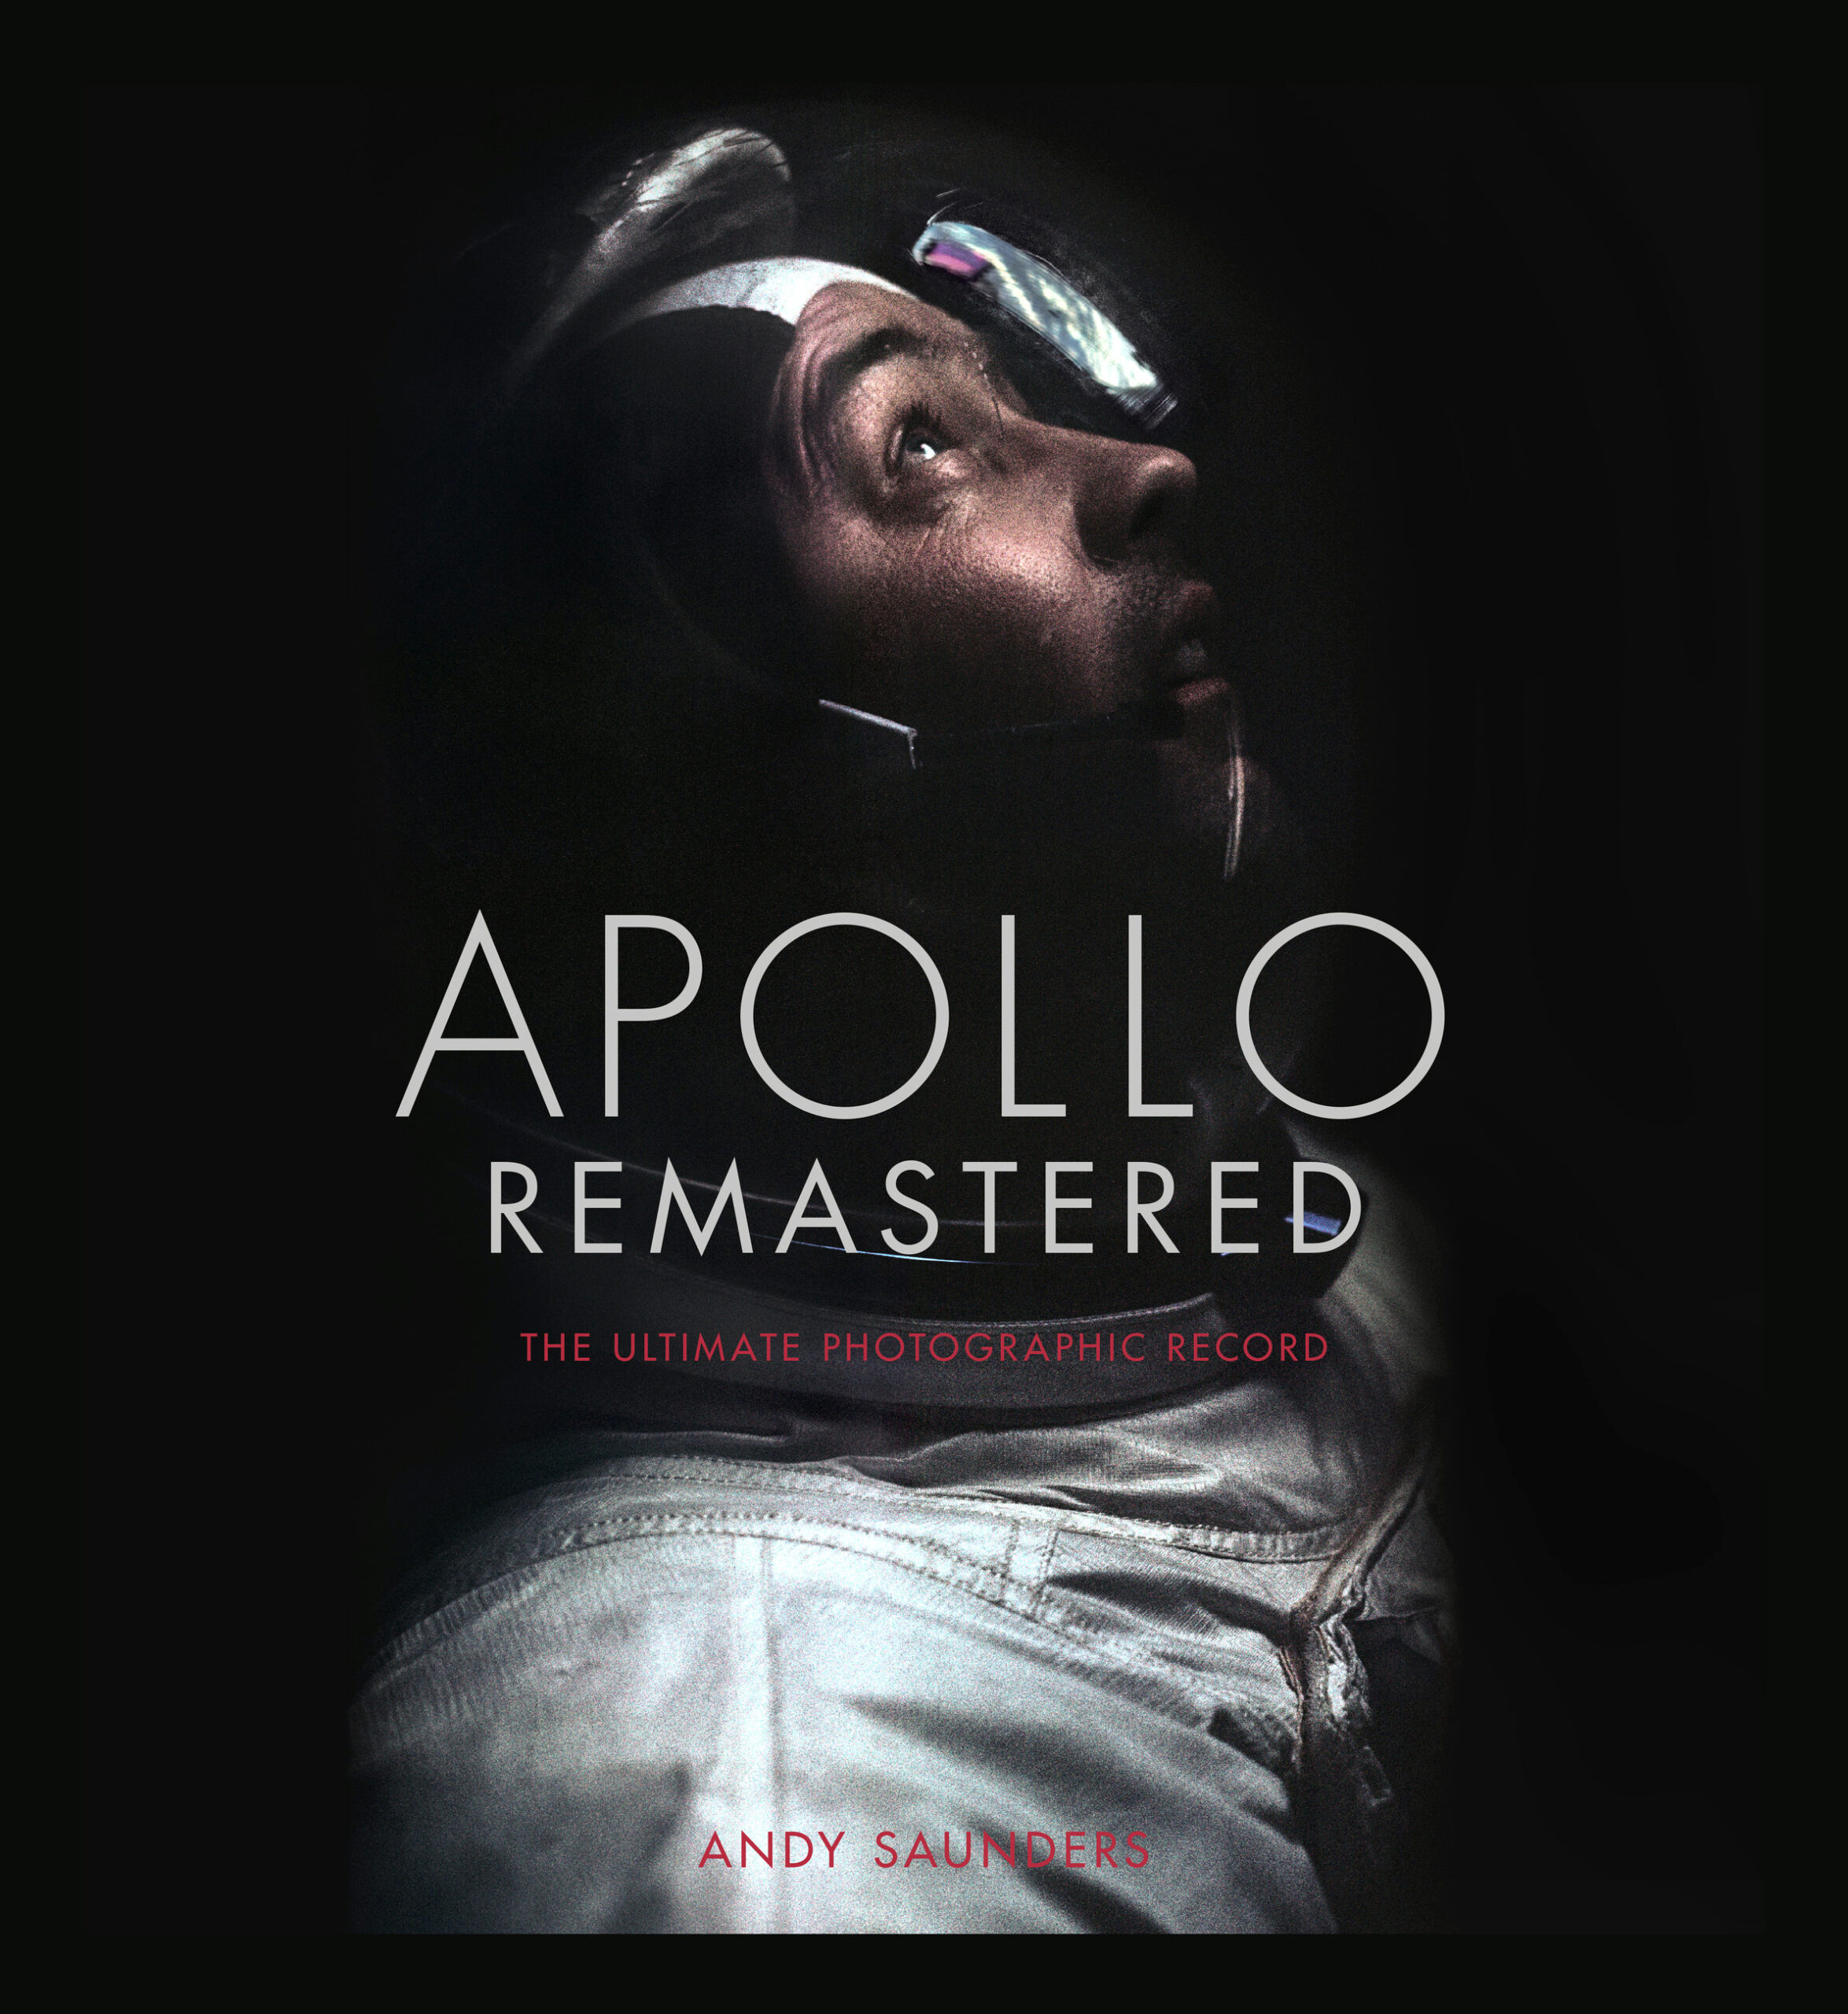 Andy Saunders' Apollo Remastered cover.